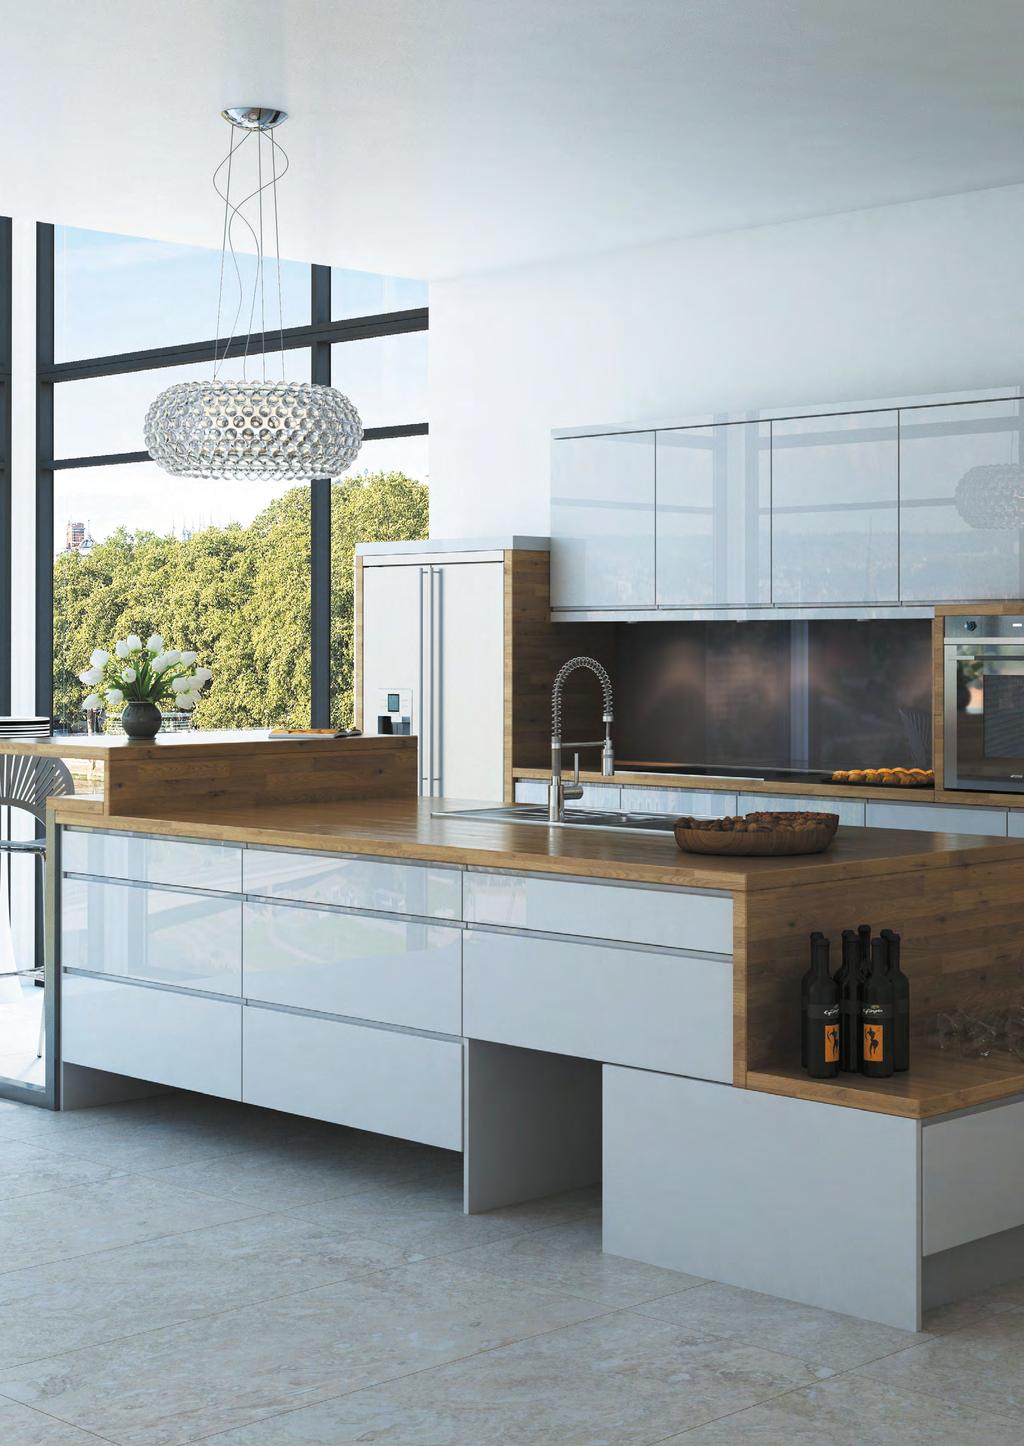 Welcome to Sheraton s inspirational and stylish world of kitchens. Our collection is innovative, distinctive and elegant from timeless and traditional to contemporary and fashionable.